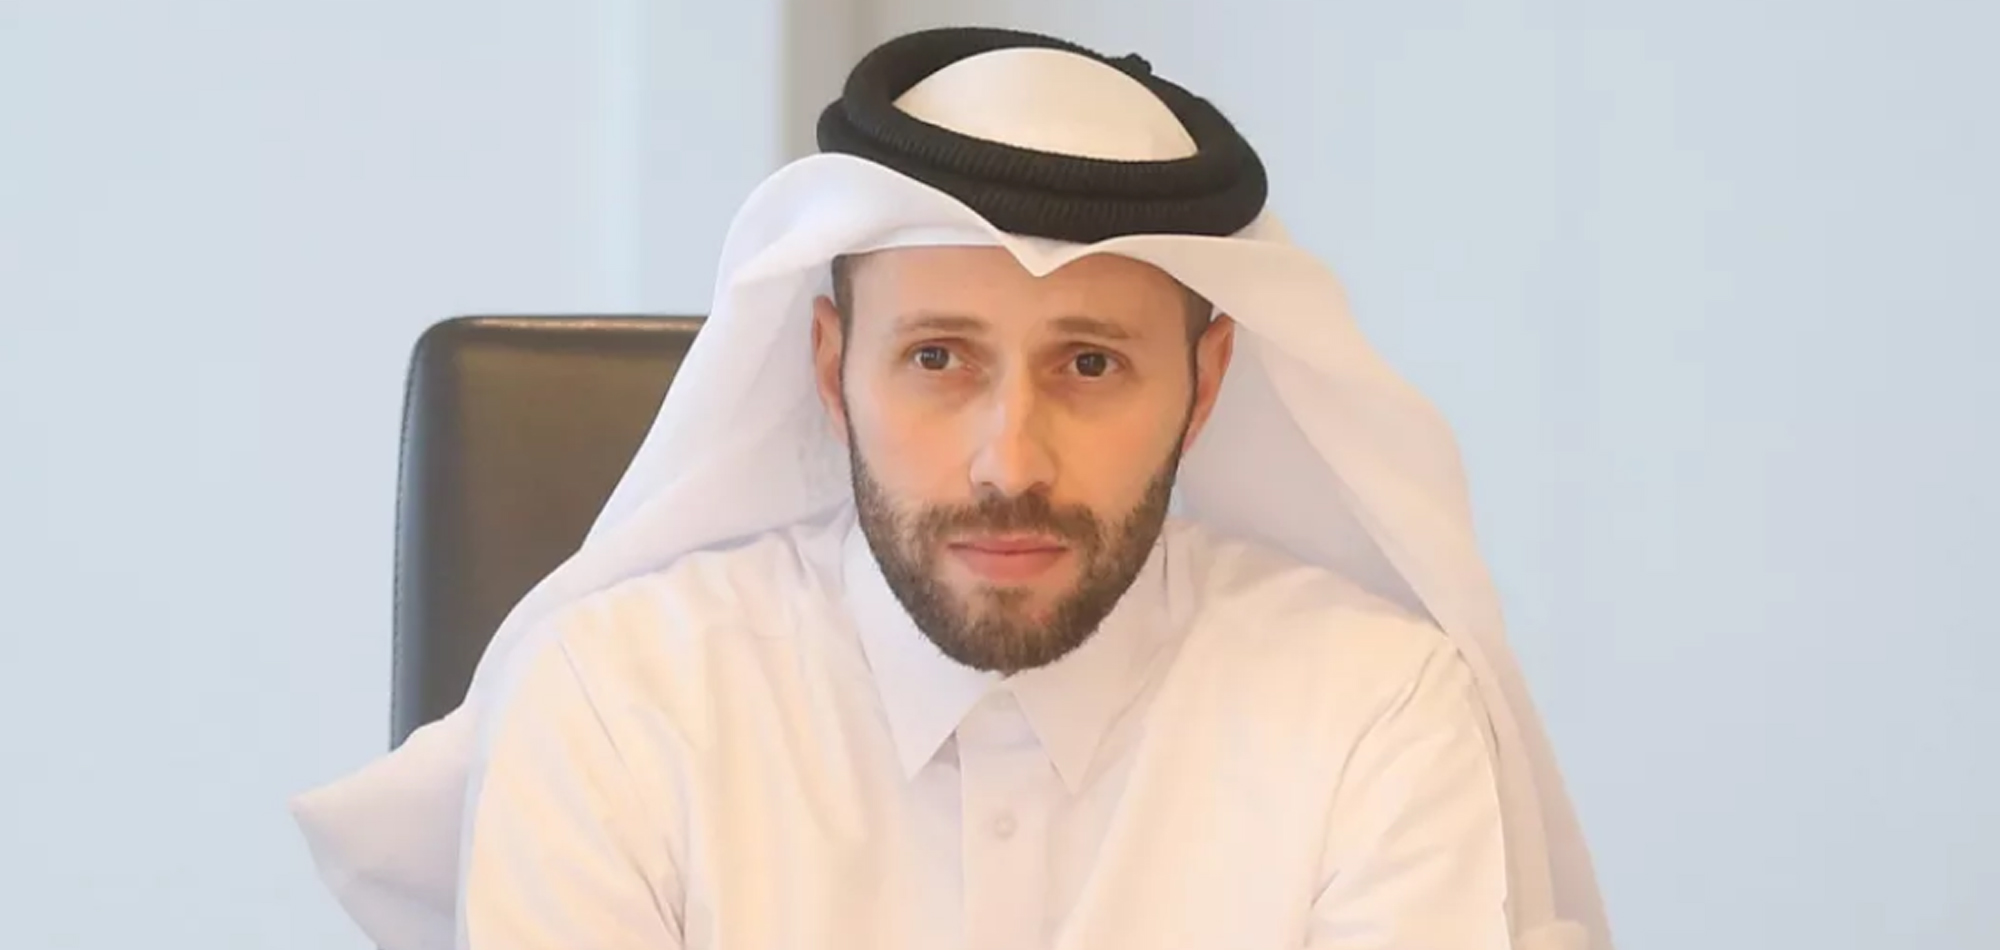 Interview with Mr. Ahmed Khellil Abbassi, Executive Director of Competitions and Football Development at Qatar Stars League